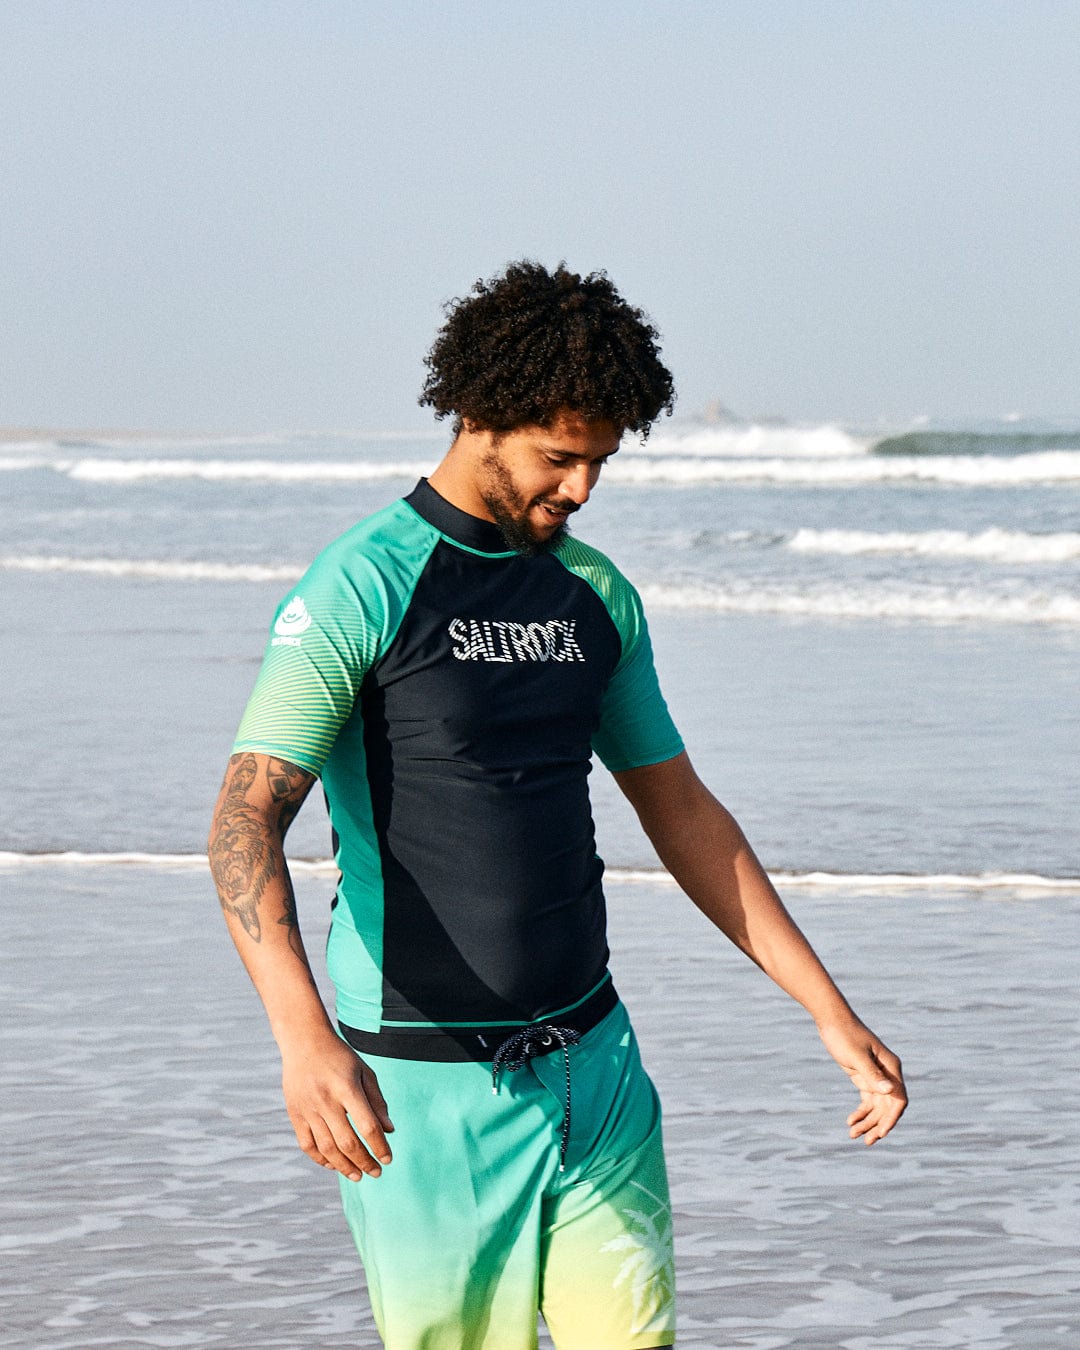 A man with curly hair wearing a Saltrock DNA Wave - Recycled Mens Short Sleeve Rashvest in Black/Green and Saltrock board shorts, both crafted from recycled polyester, stands on a beach, smiling down as he touches his waist.